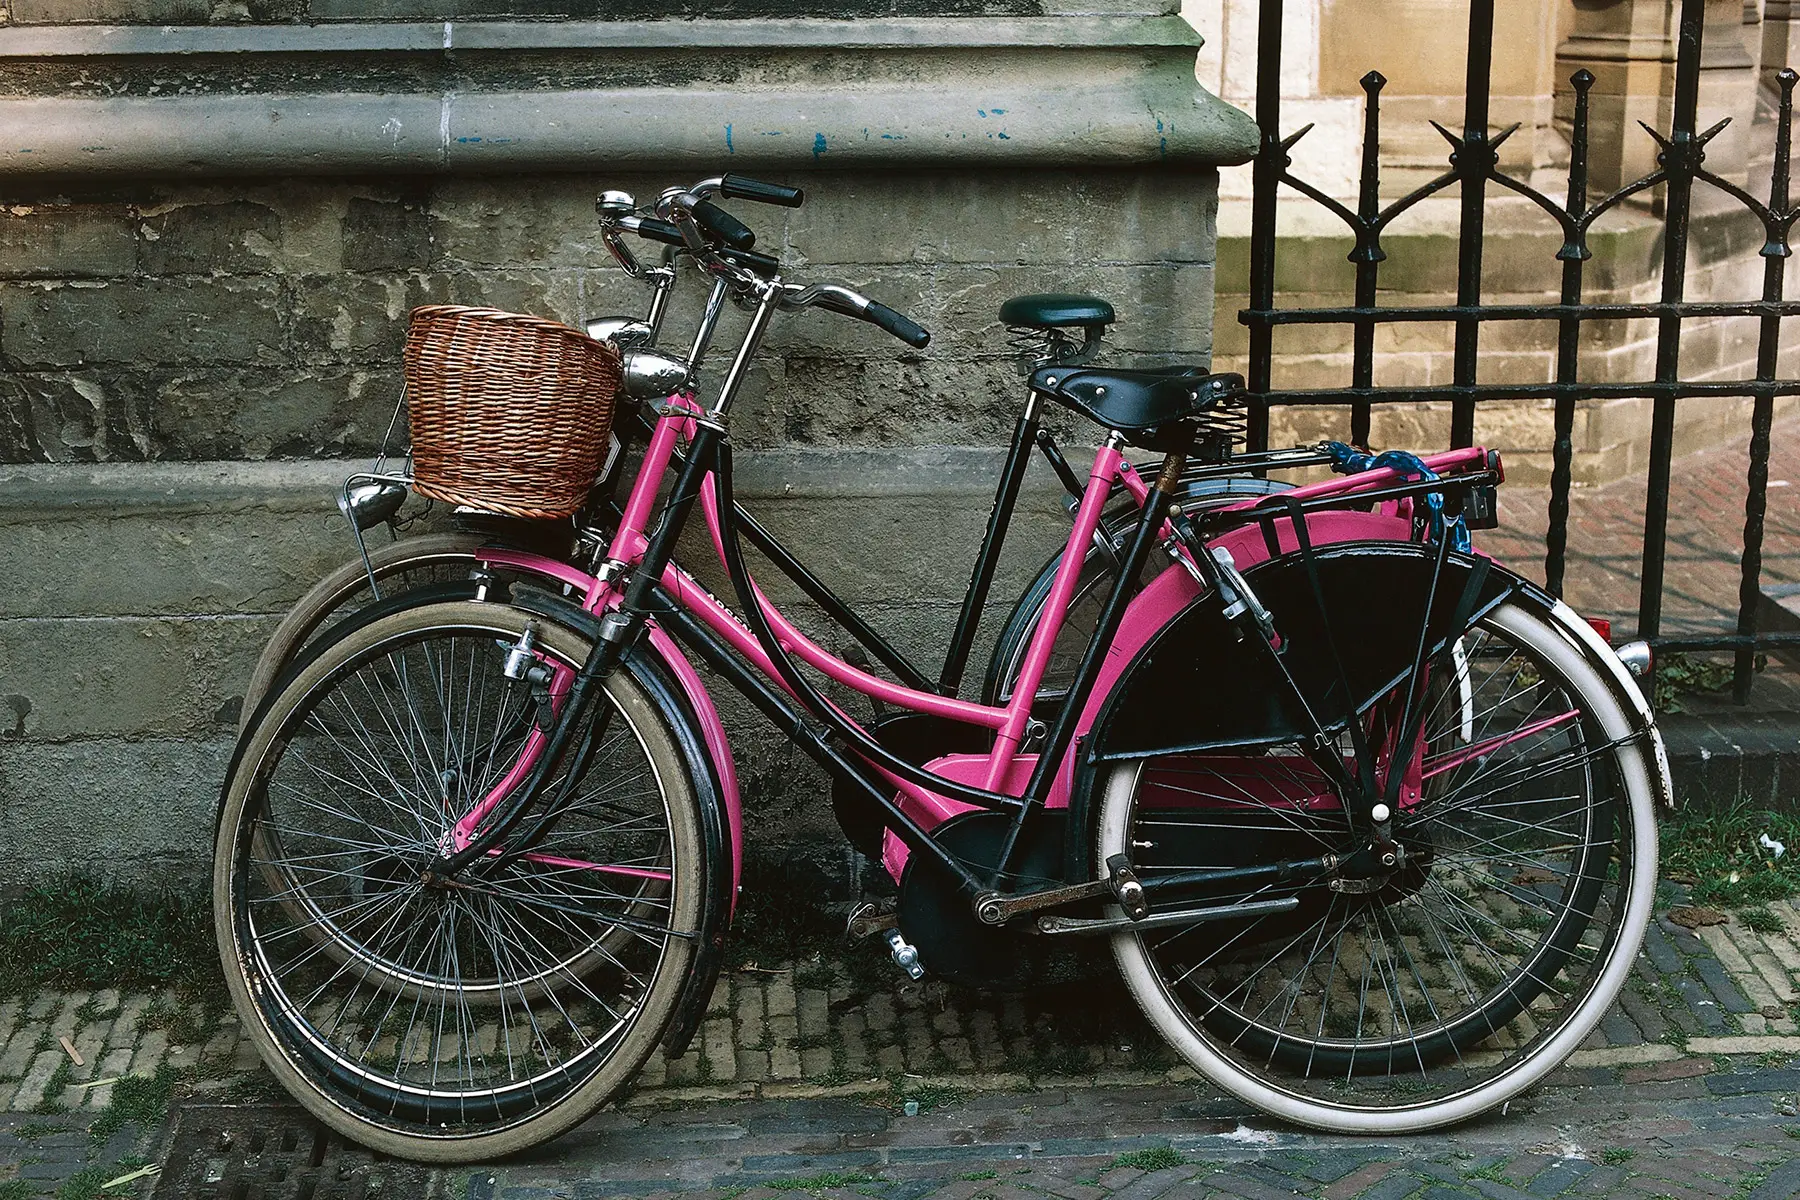 Two black bicycles and a pink one leaning against a wall.